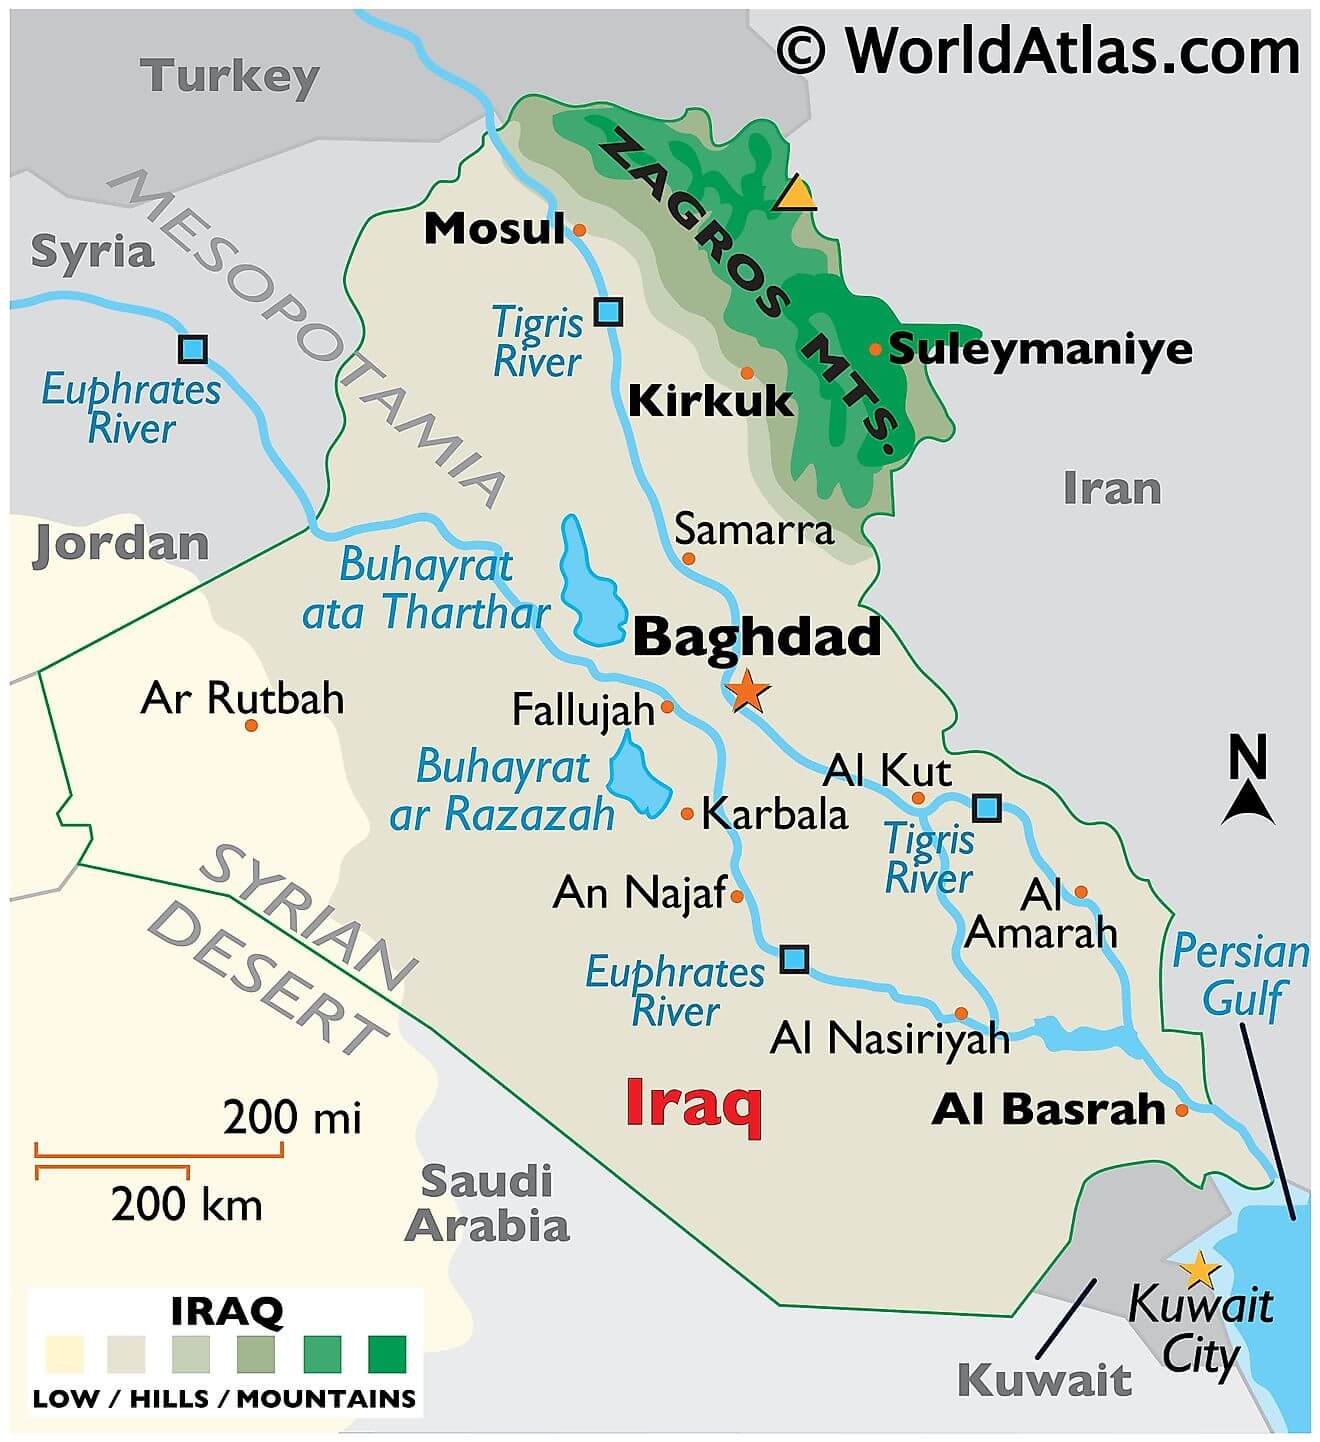 Physical Map of Iraq